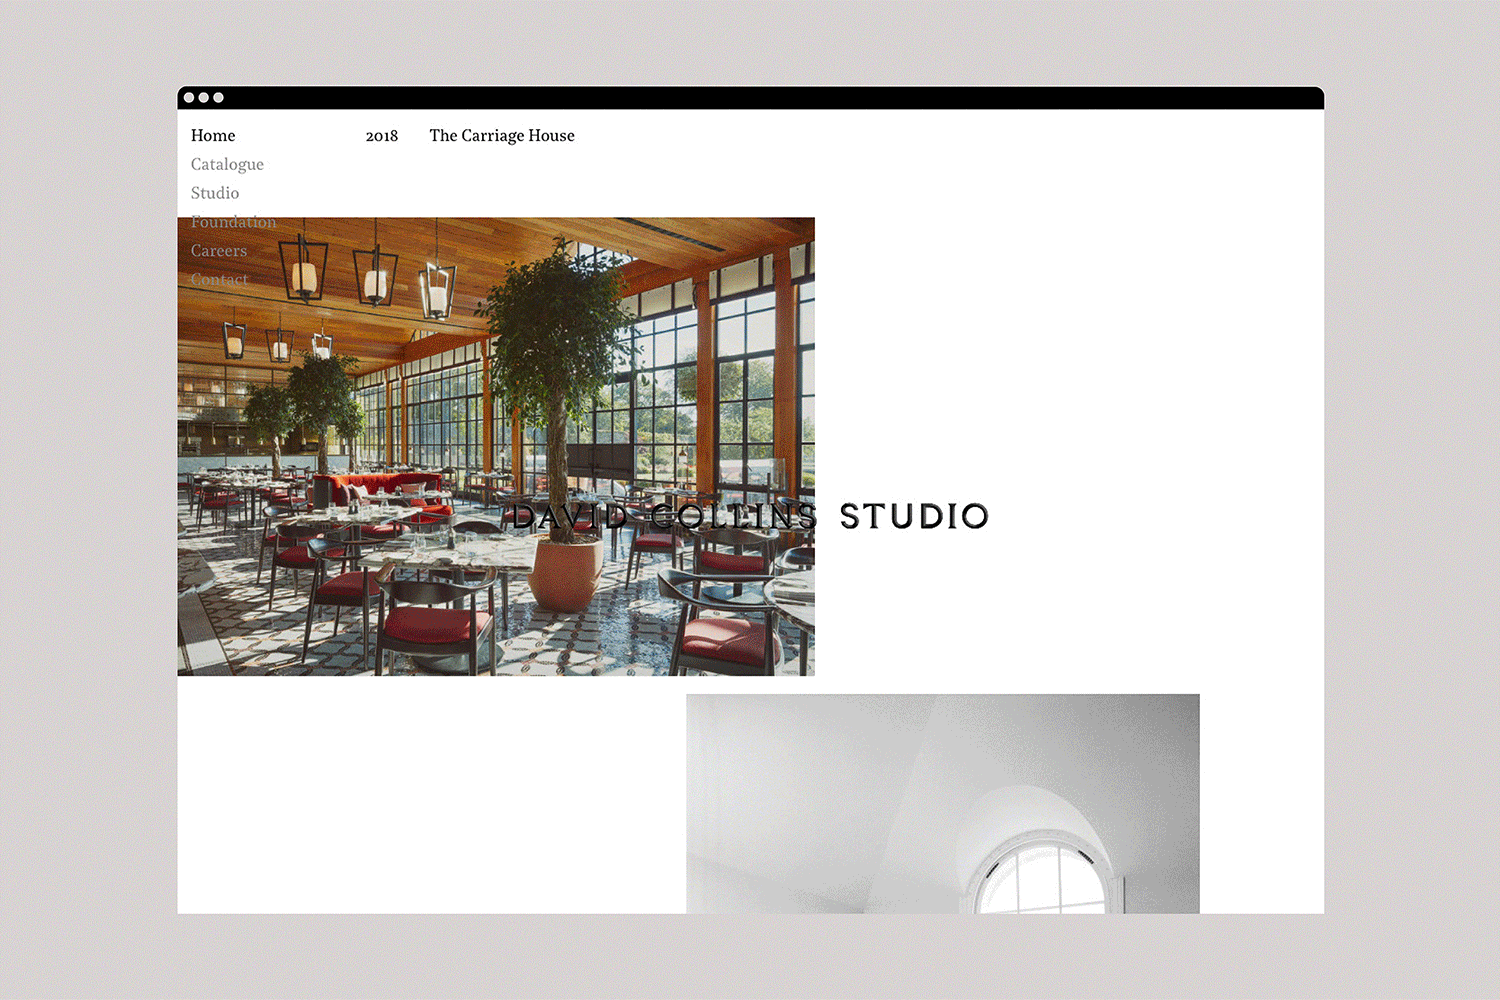 Bibliothèque Design (brand identity) and Future Corp (digital art direction) collaboratively redesign the identity and website of David Collins Studio.